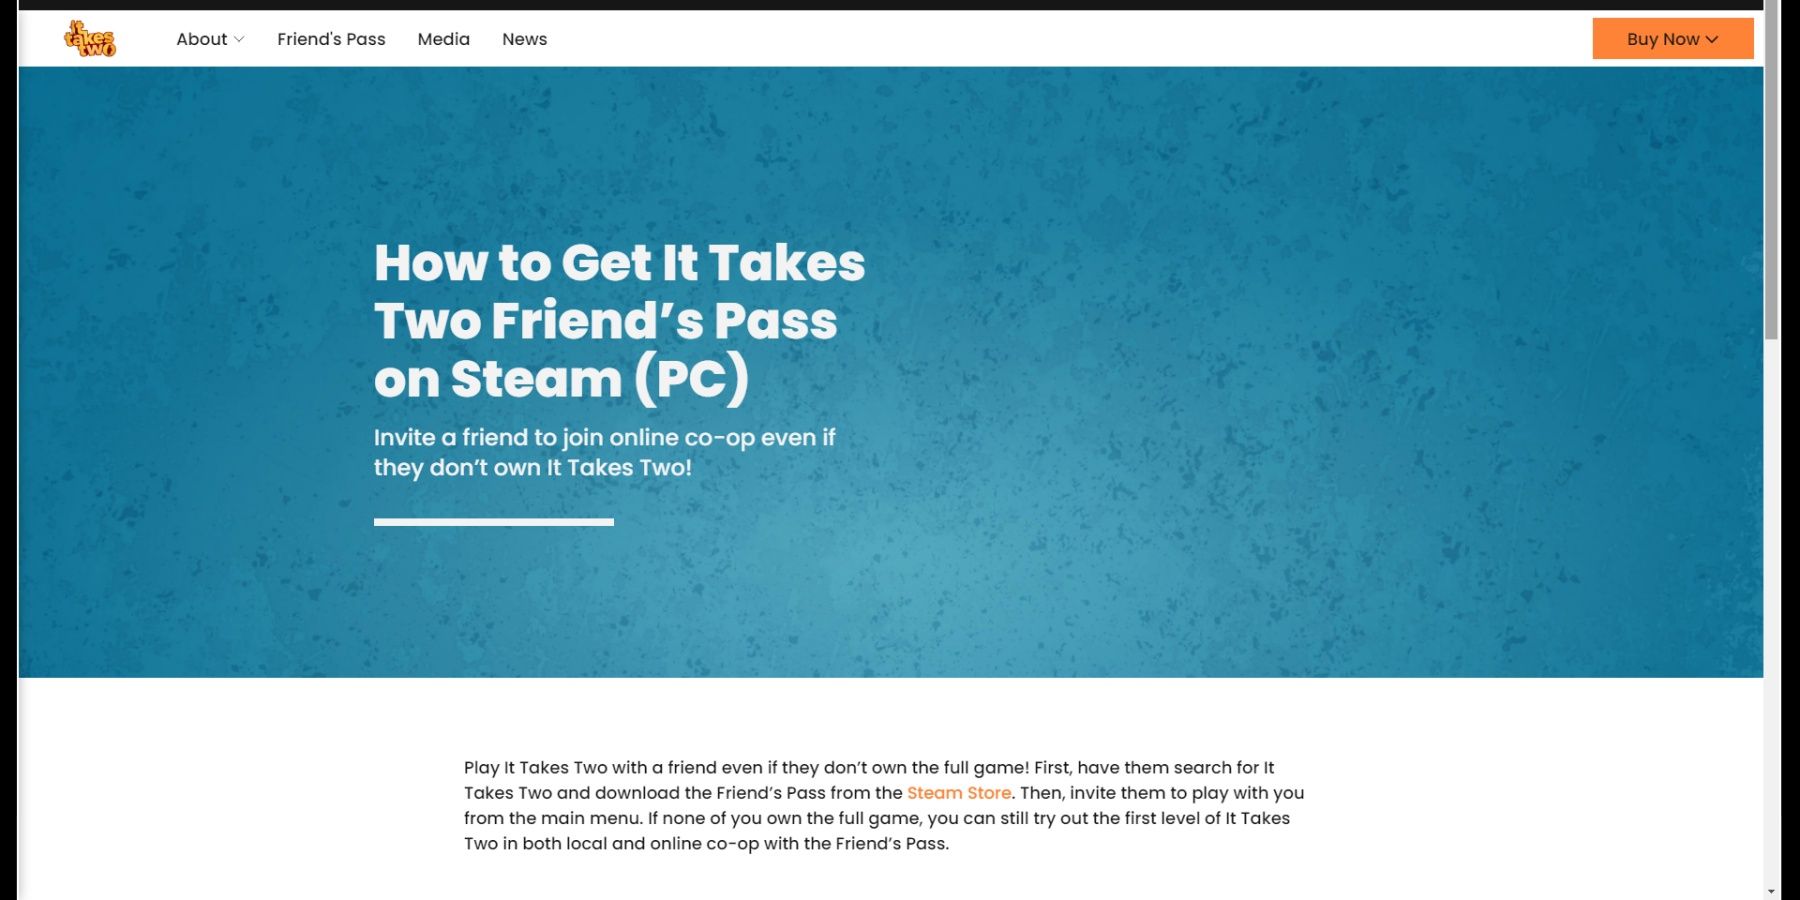 It Takes Two Friend's Pass on Steam